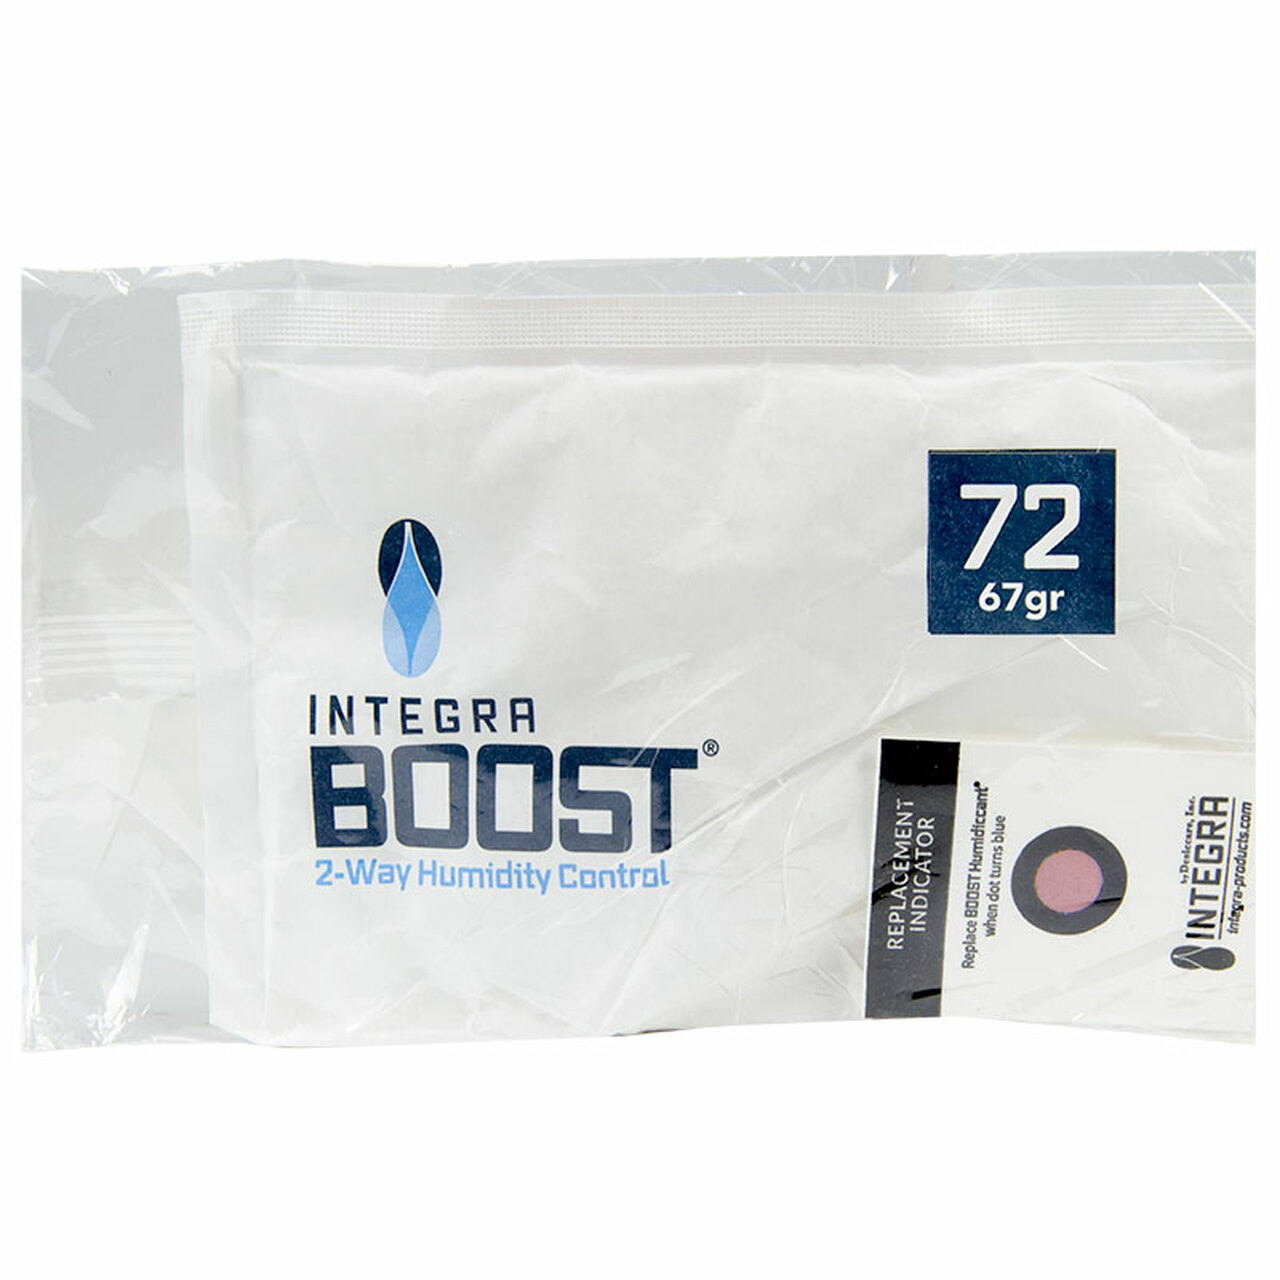 Desiccare Integra BOOST® 67 gram size 2-way humidity control packs are available in 72% RH styles and are FDA-compliant, 99% biodegradable, non-toxic and salt free. Includes humidity indicator cards; individually overwrapped